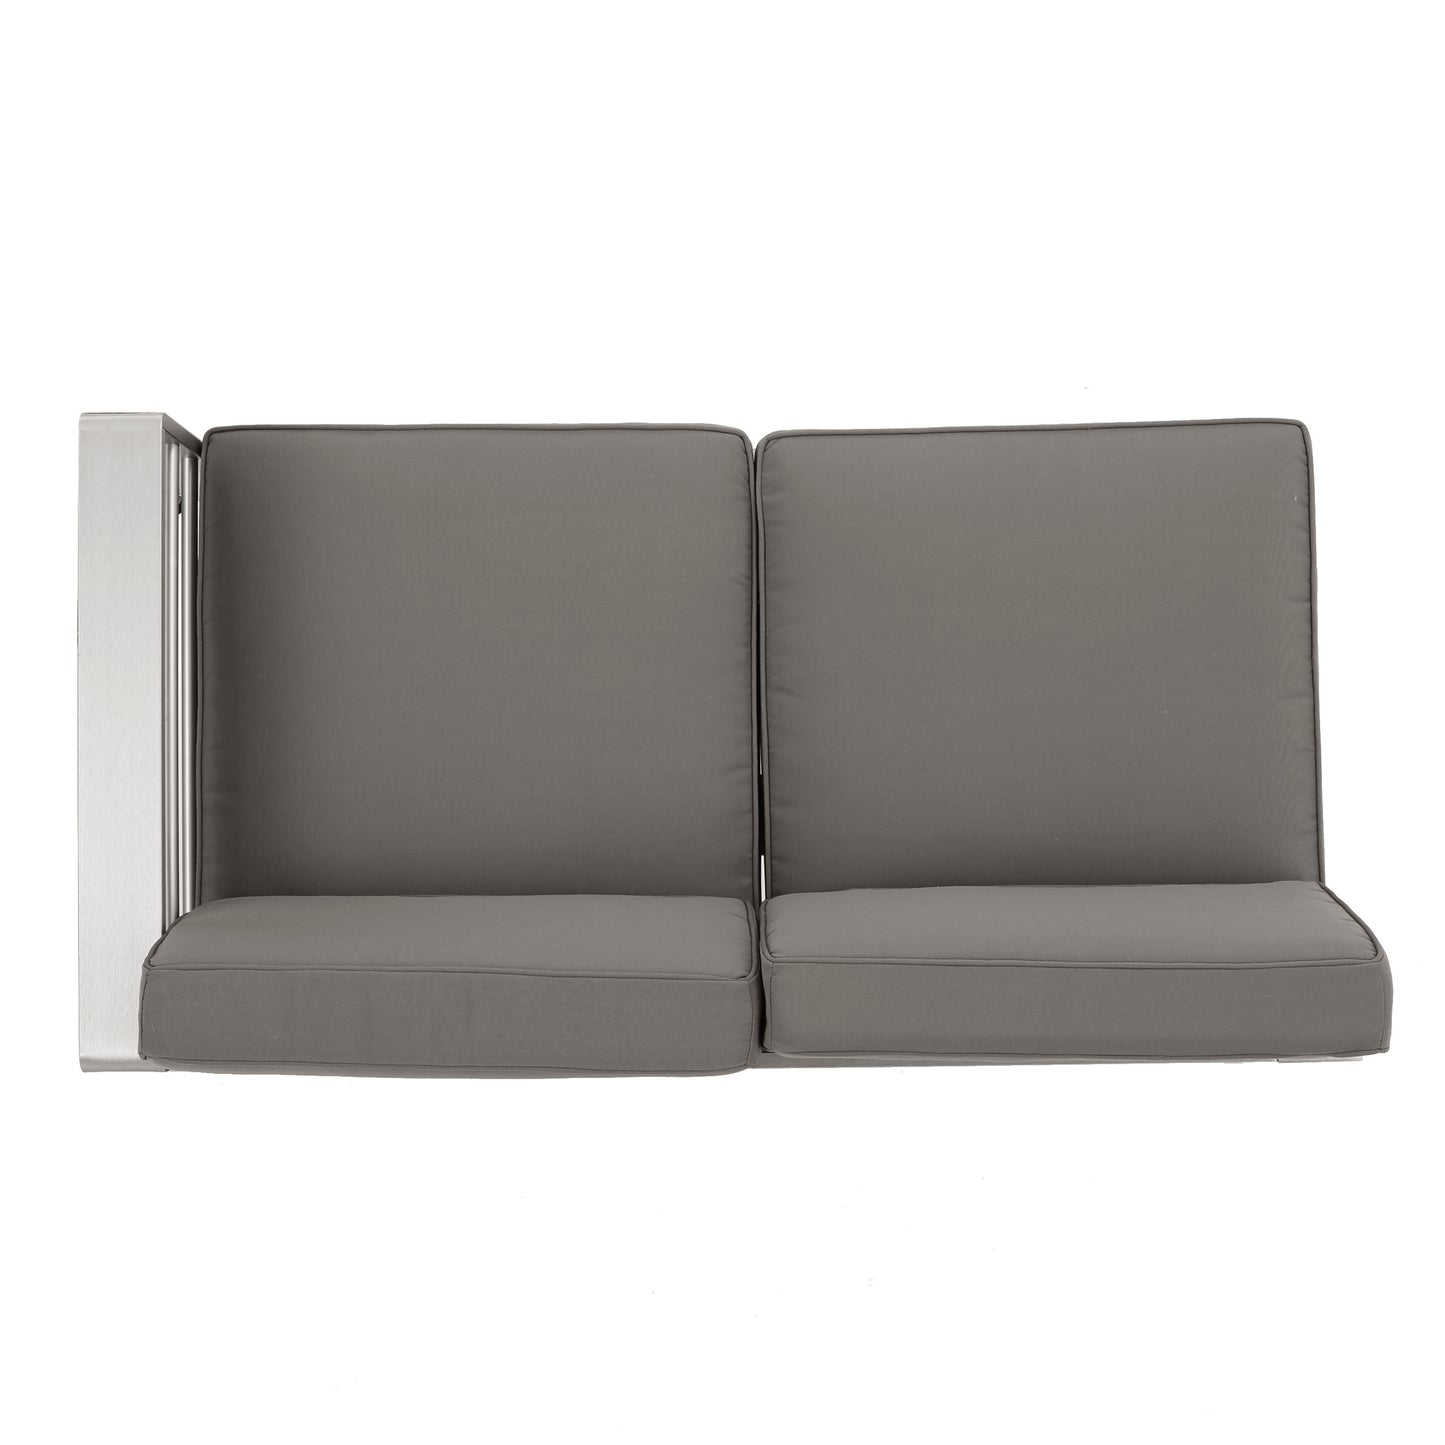 Laura Outdoor Modern 9 Seater Aluminum U-Shaped Sofa Sectional Set with Ottoman, Silver and Khaki